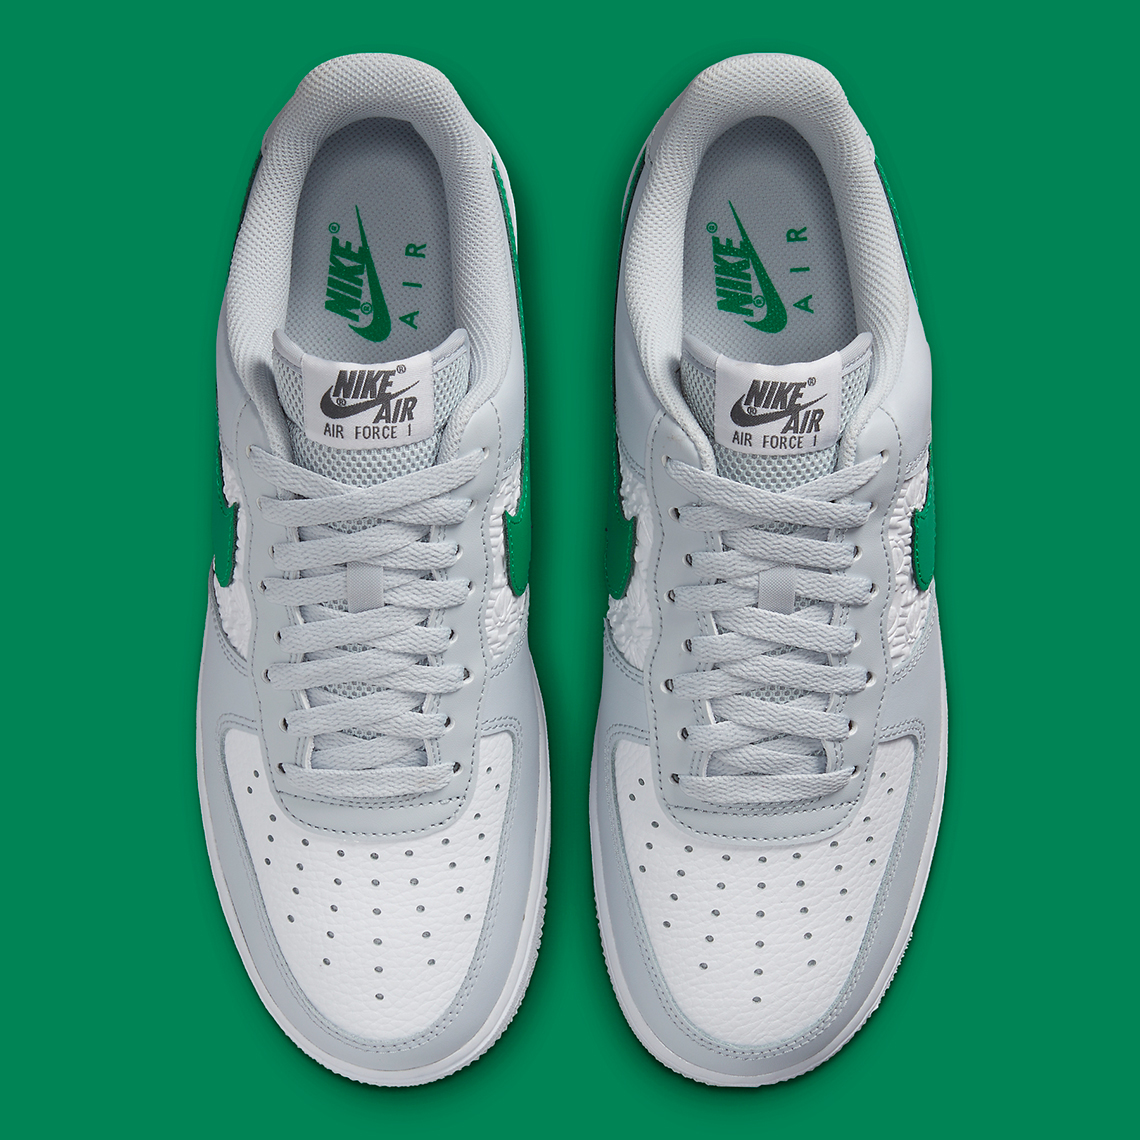 New-In Sneakers At drawstring Nike You Need To Know About Low Grey Green Hoops Fd0667 001 2